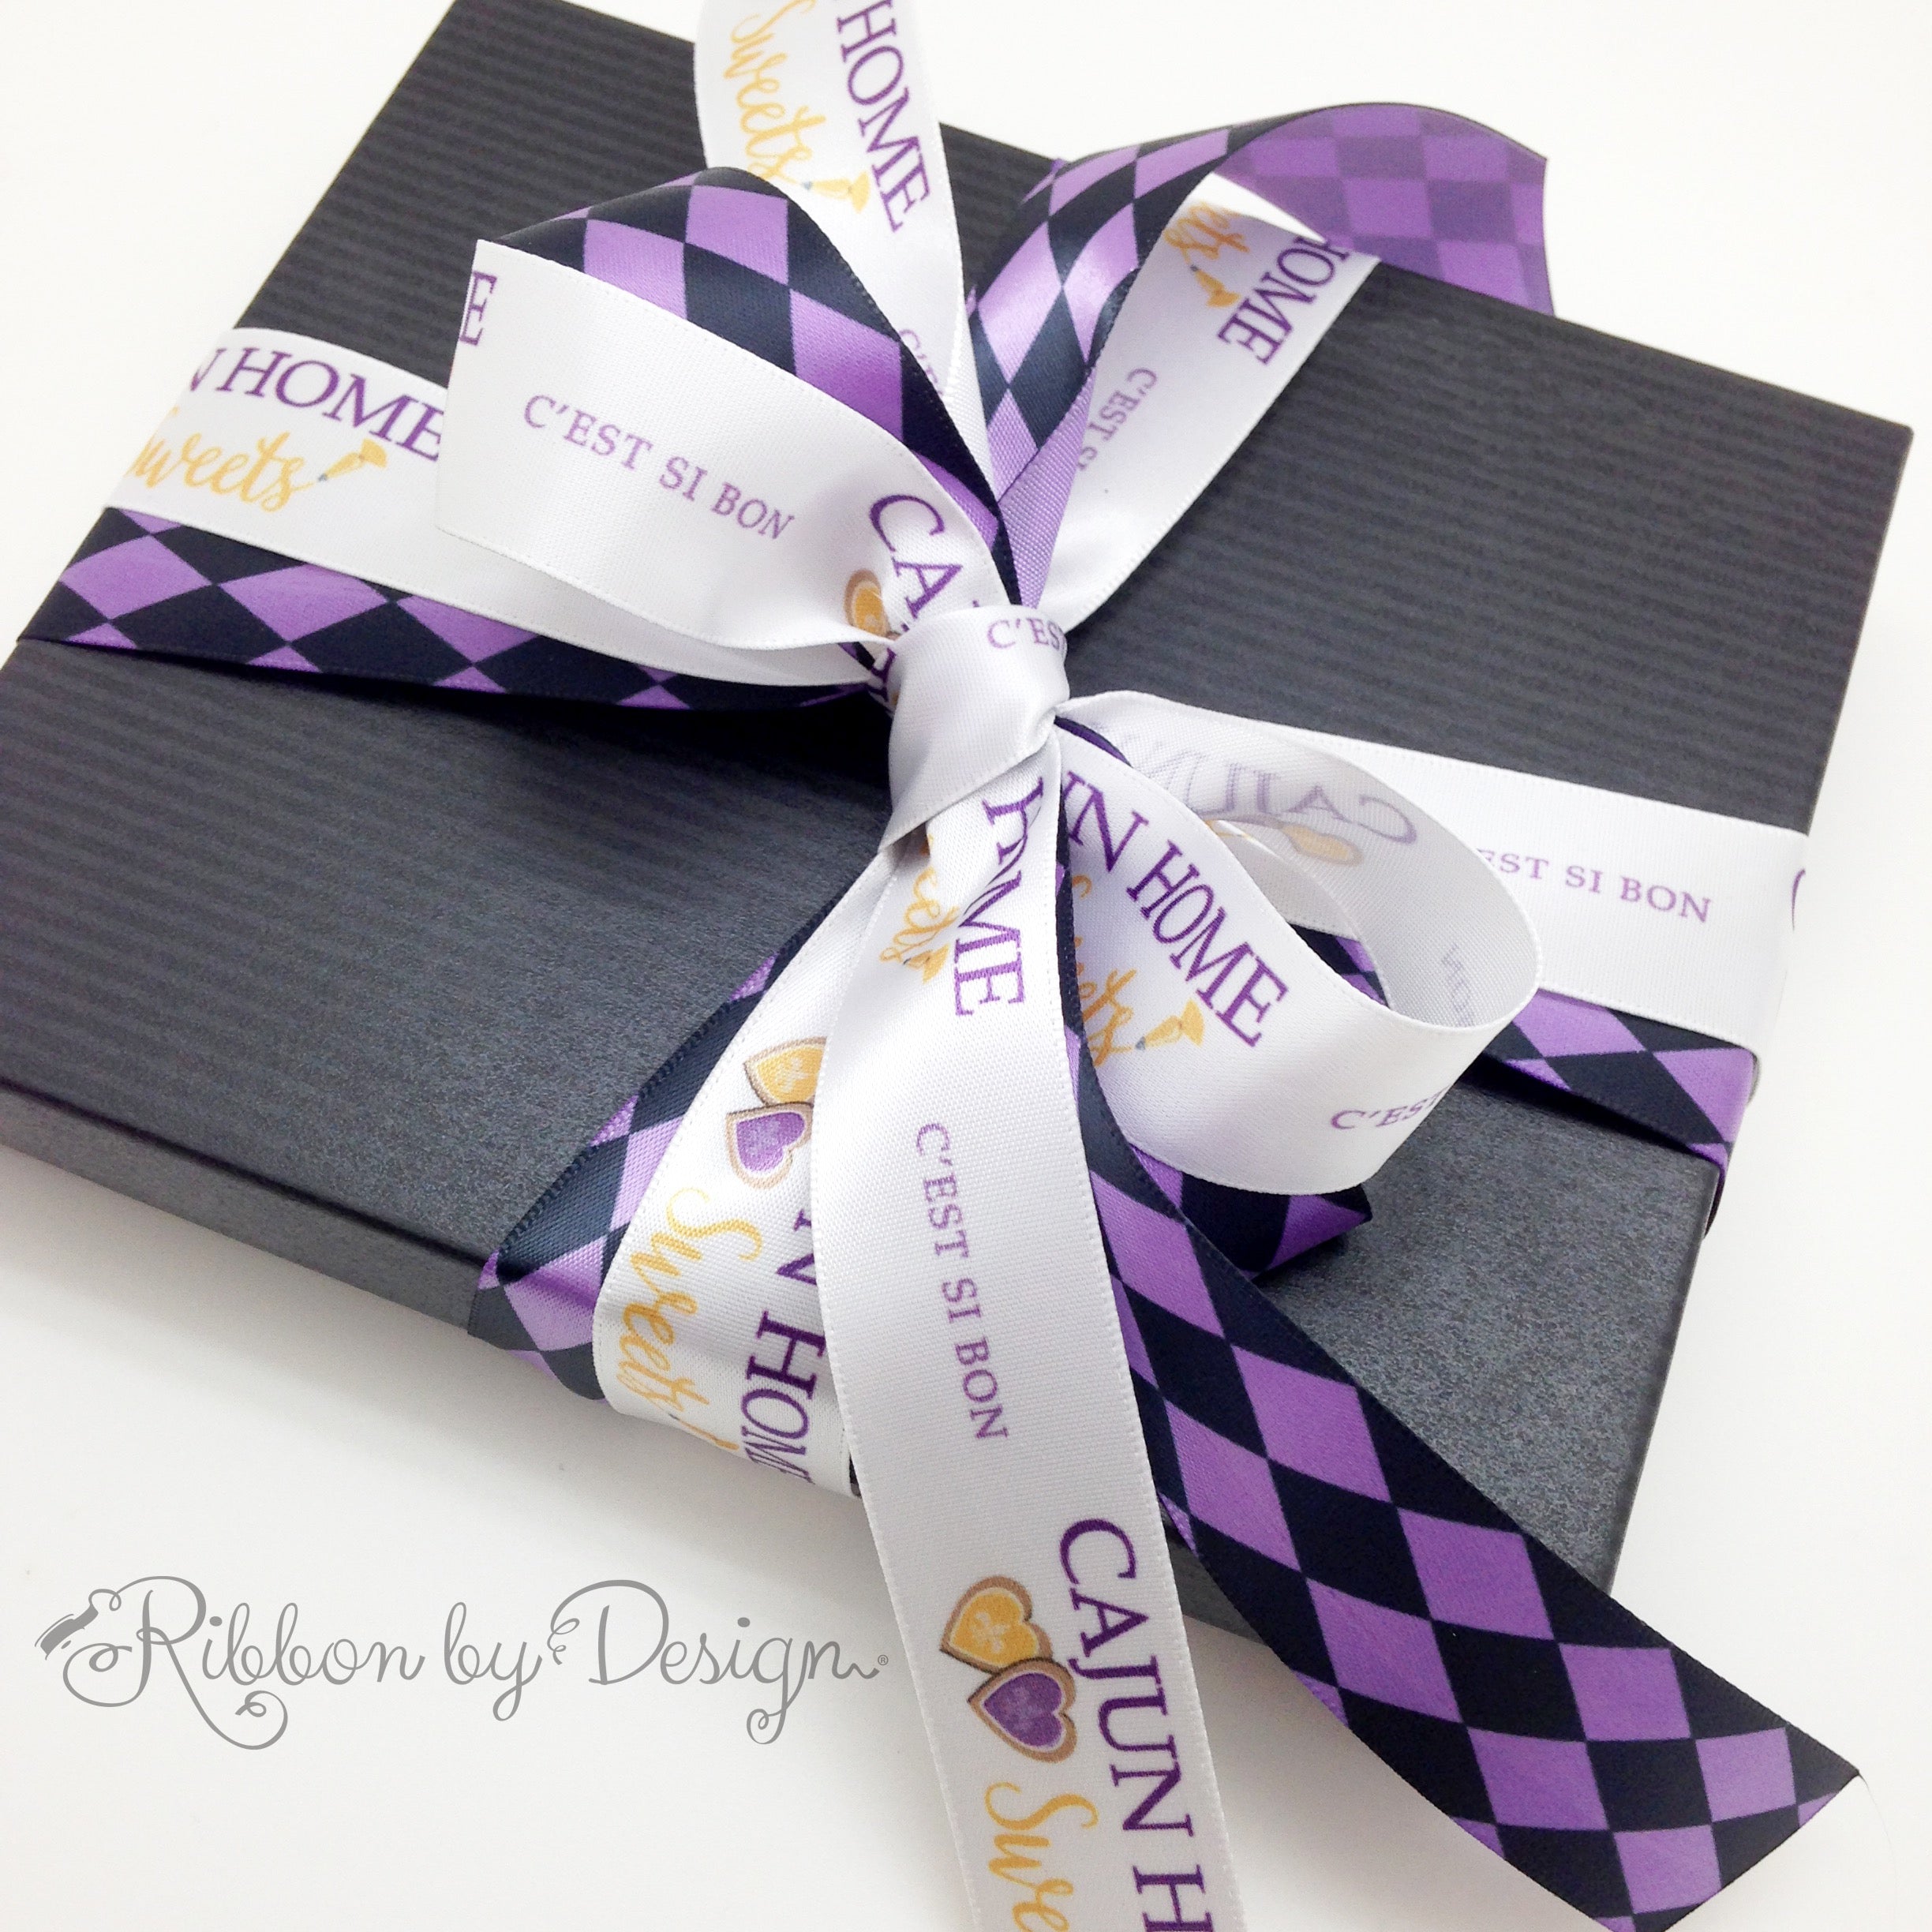 Cajun Home Sweets' packaging box with their custom ribbons